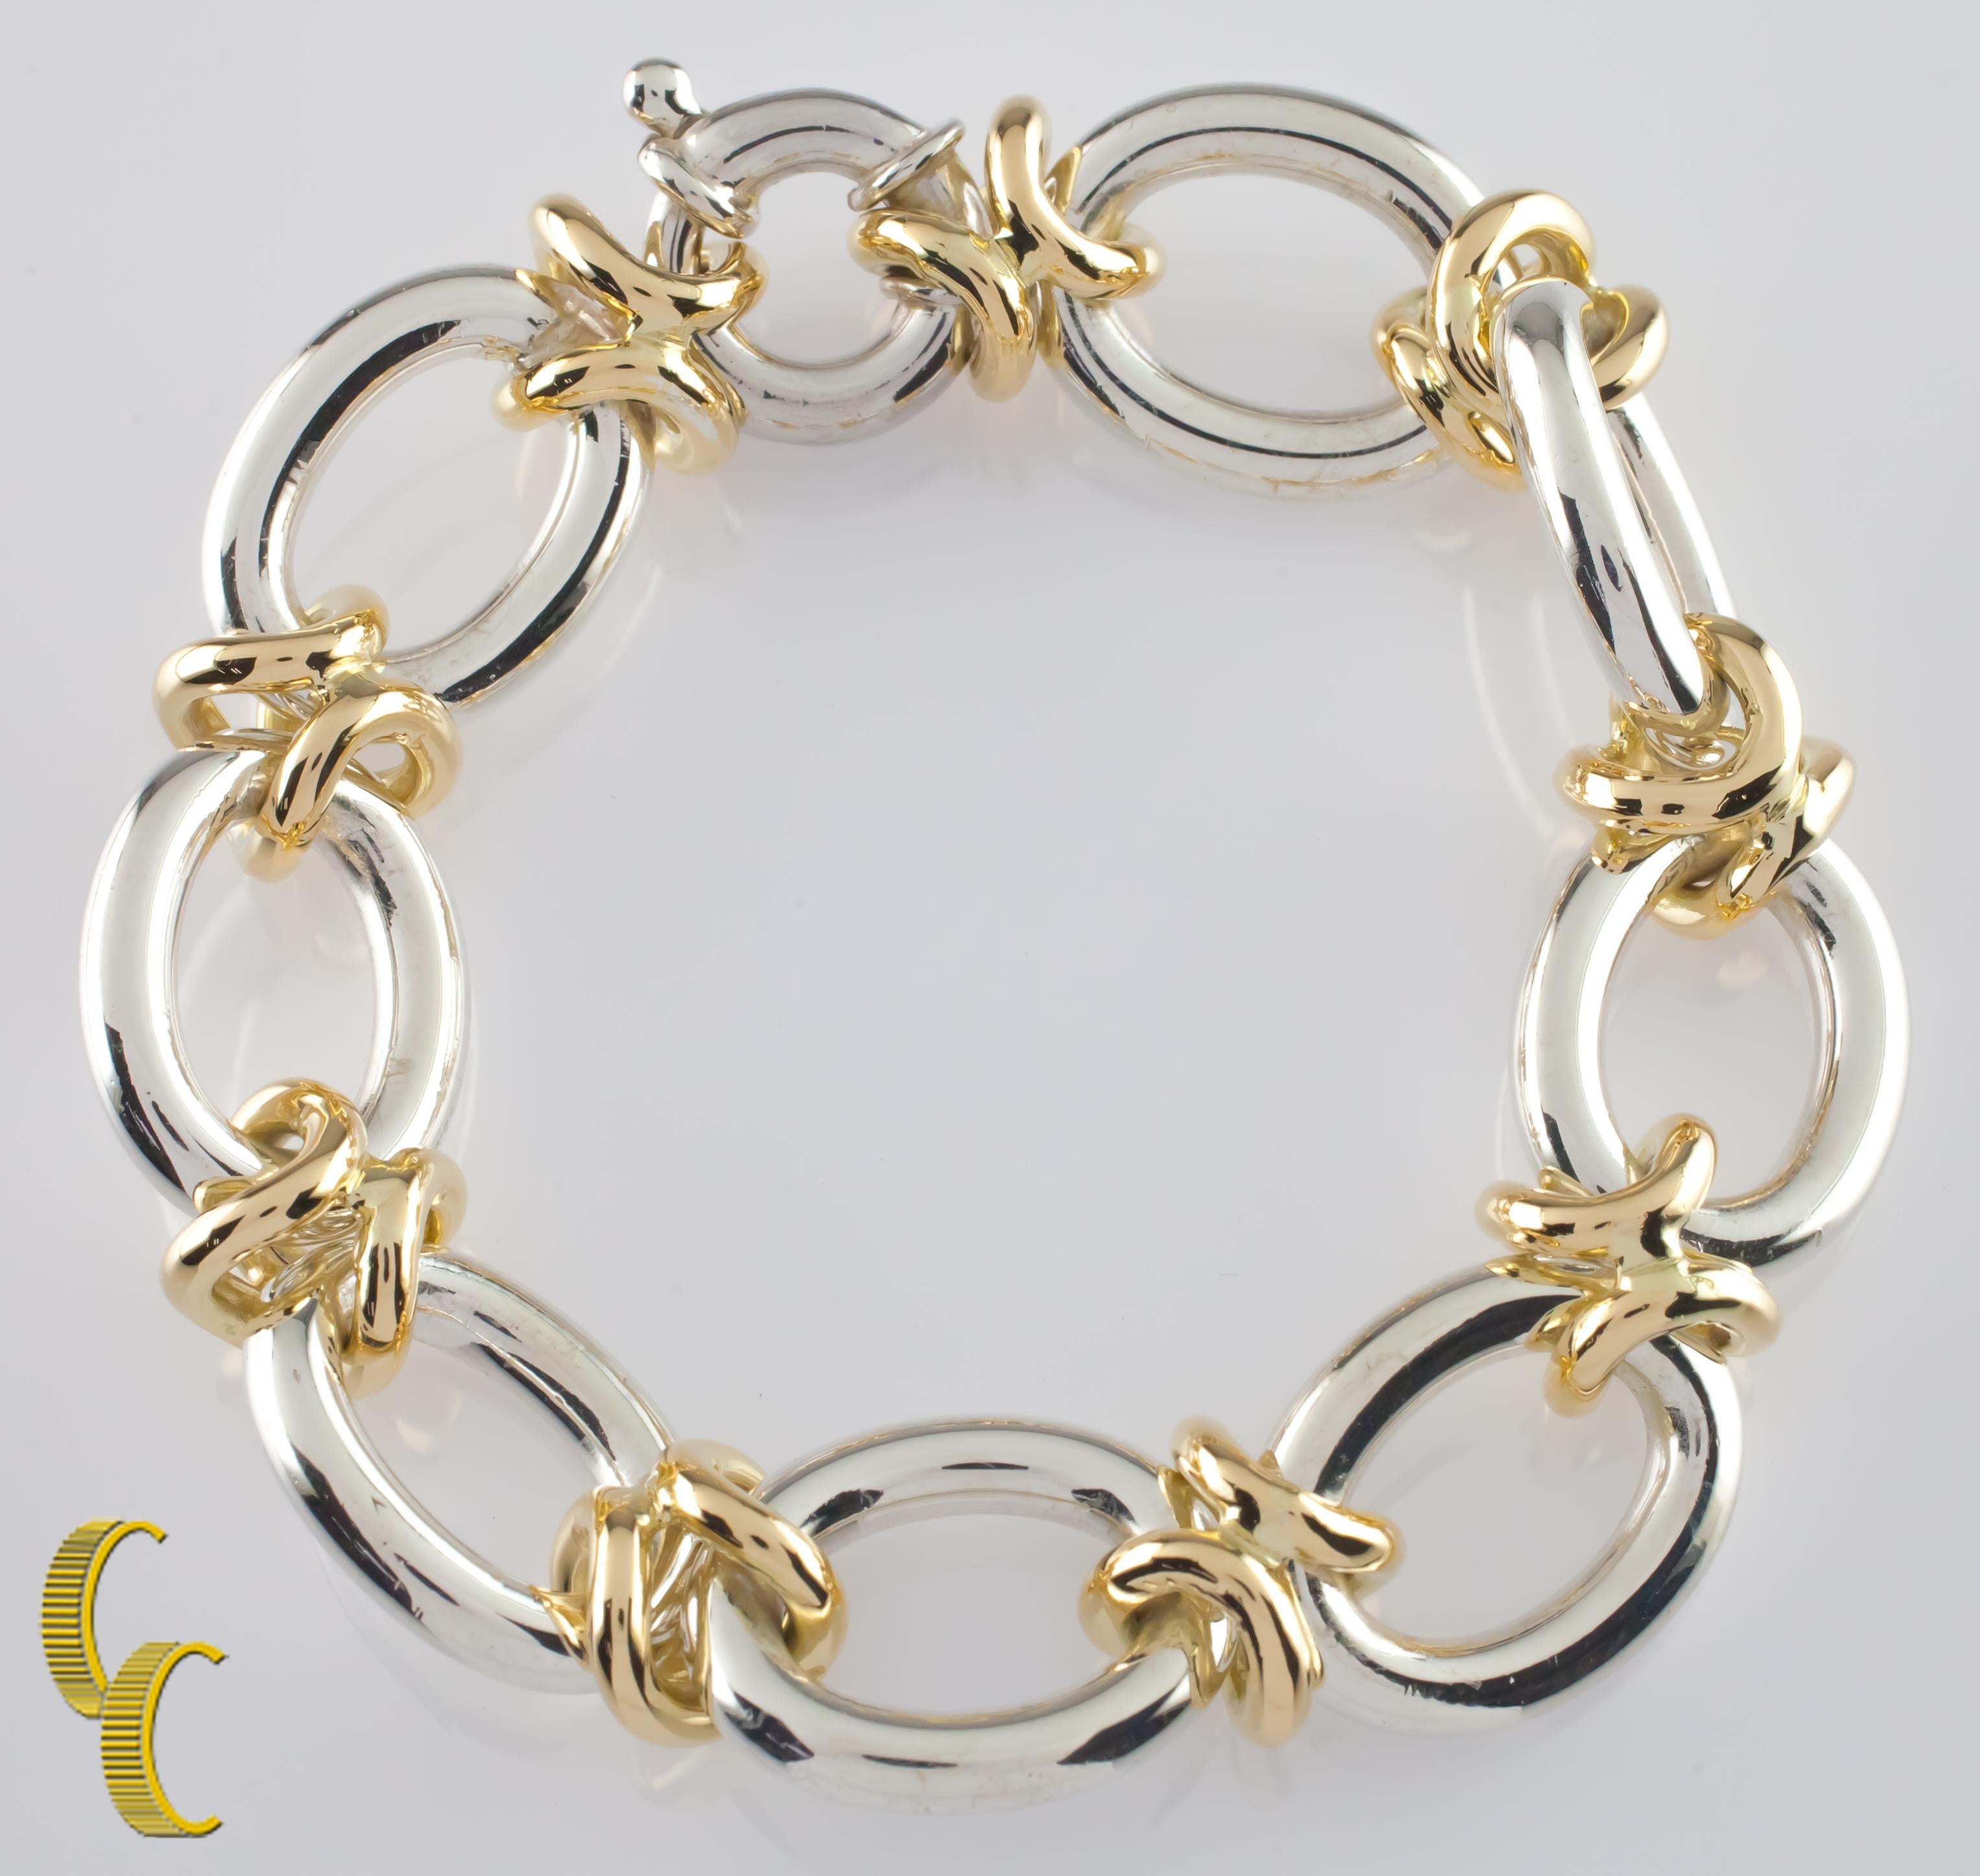 14 Karat Yellow Gold and Sterling Silver Heavy Link Bracelet 76.6 grams In Good Condition For Sale In Sherman Oaks, CA